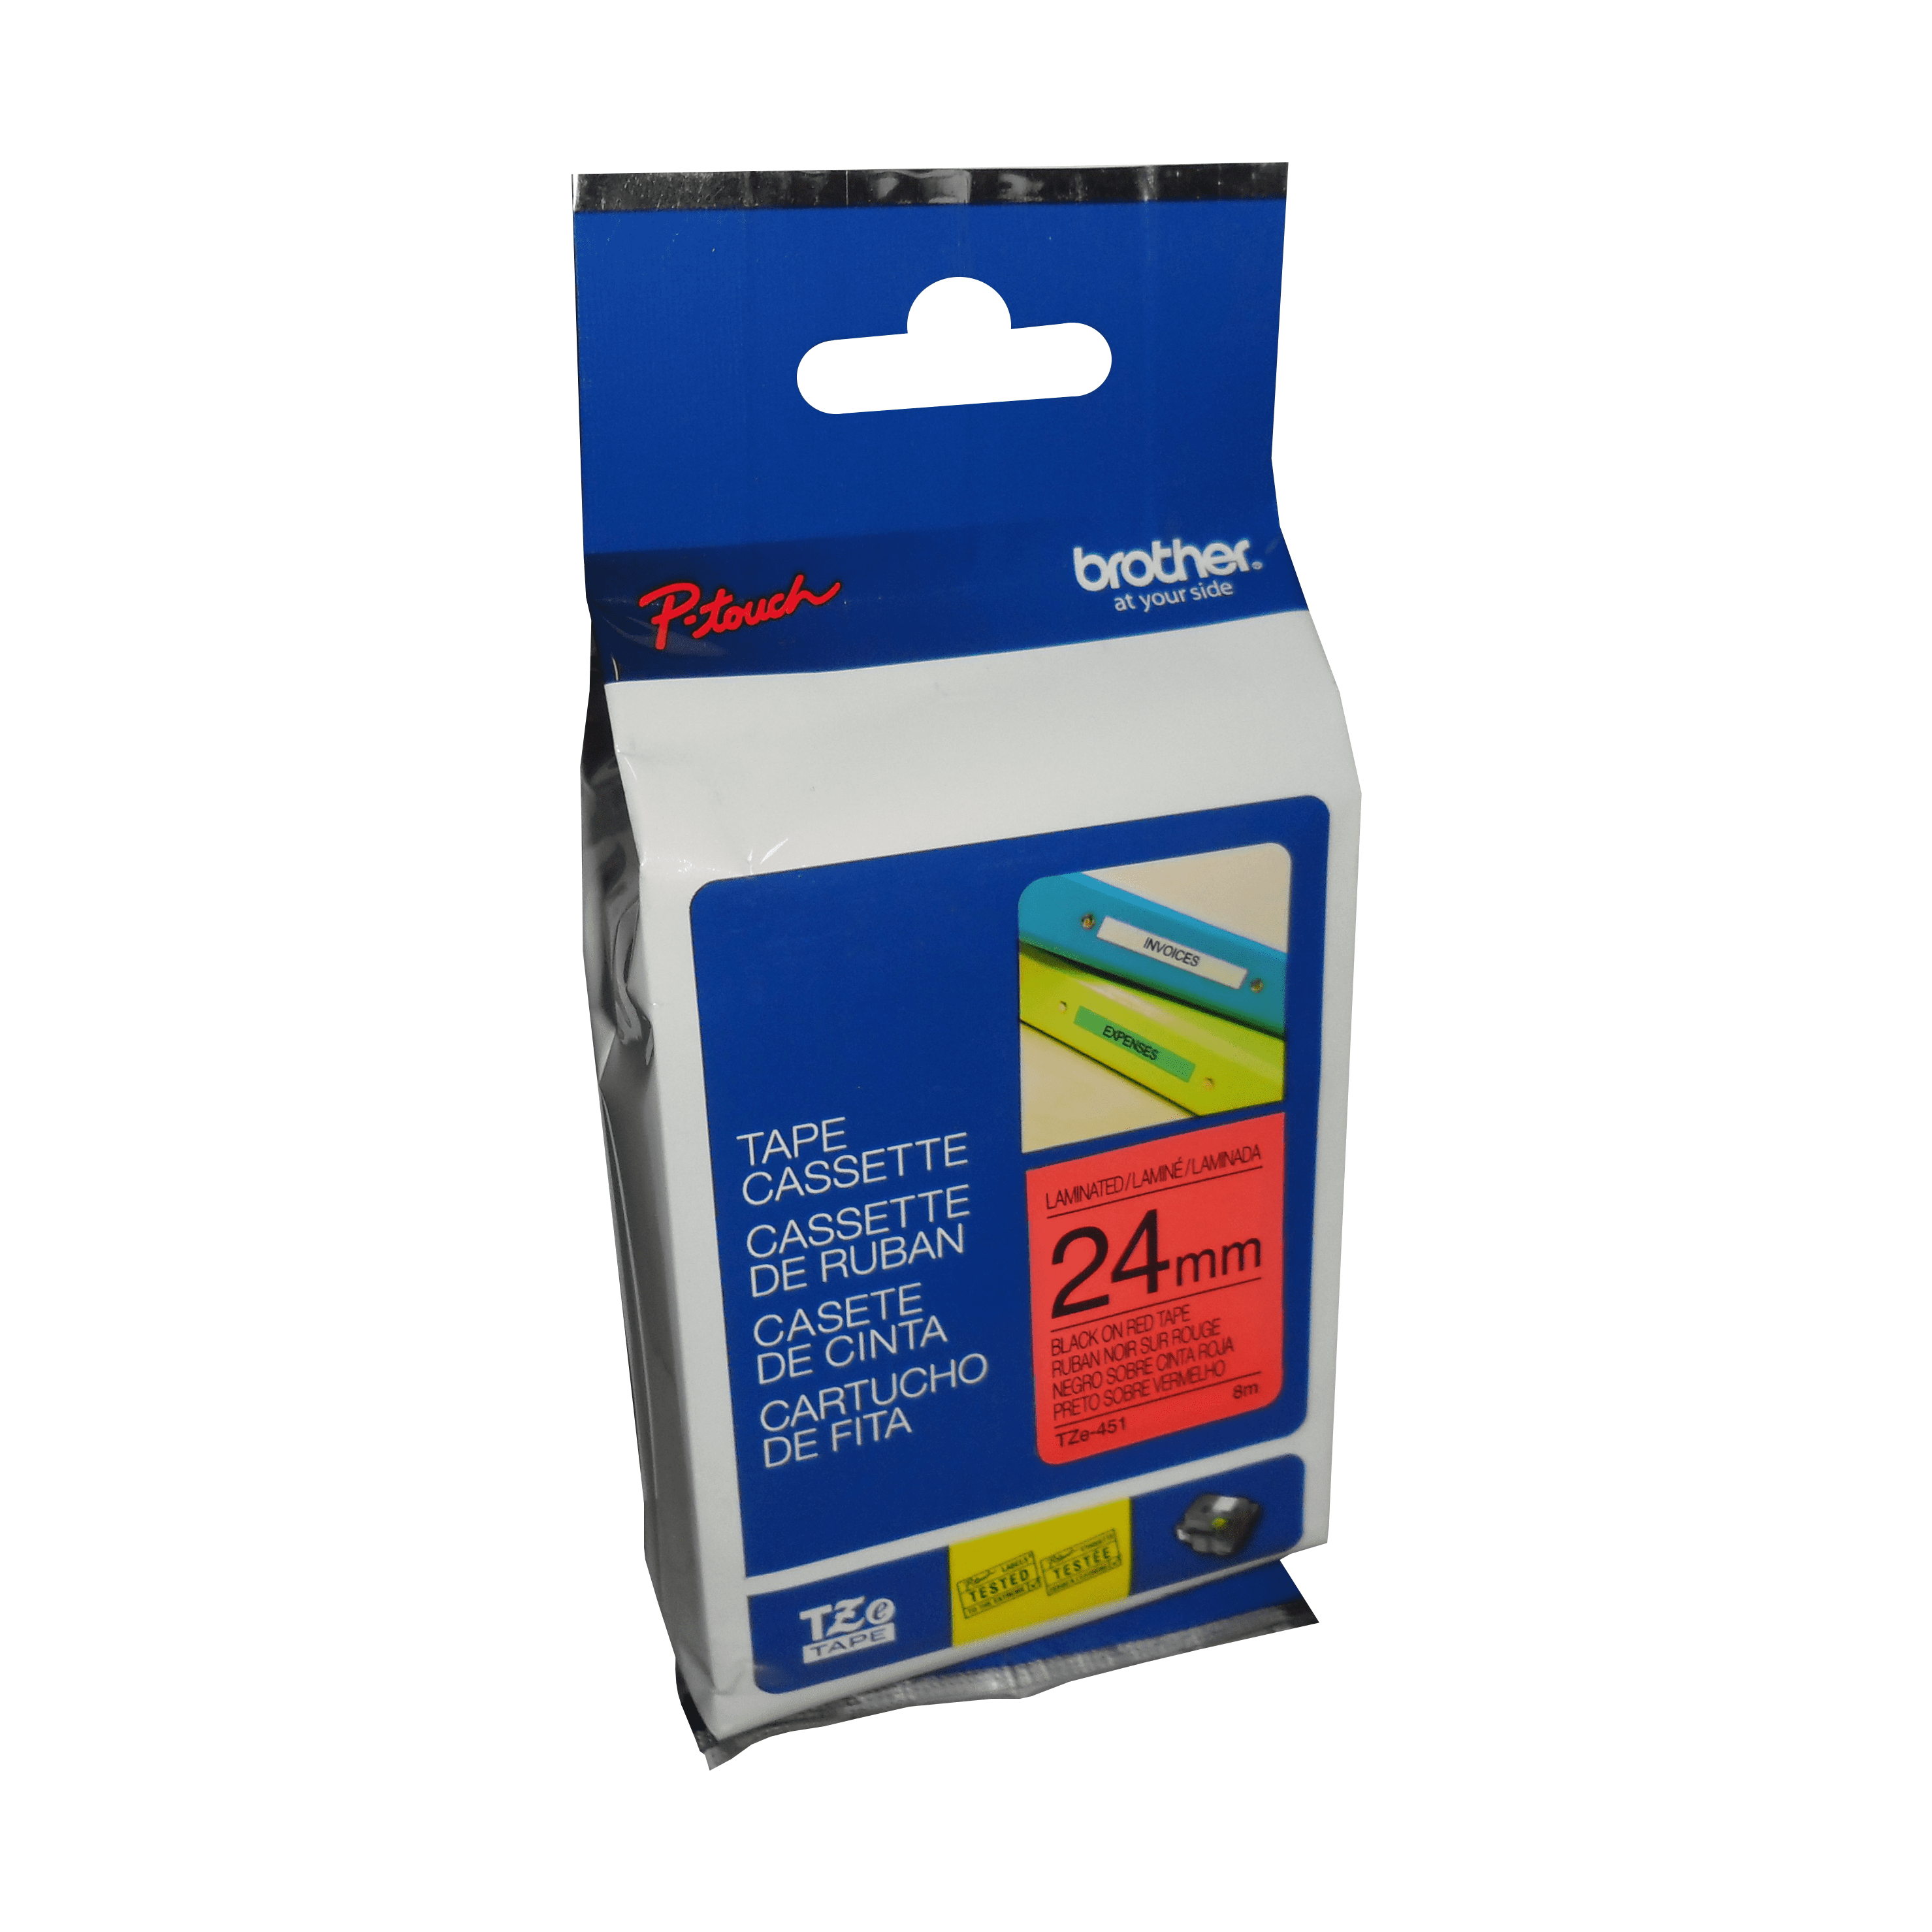 Brother Genuine TZe451 Black on Red Laminated Tape for P-touch Label Makers, 24 mm wide x 8 m long